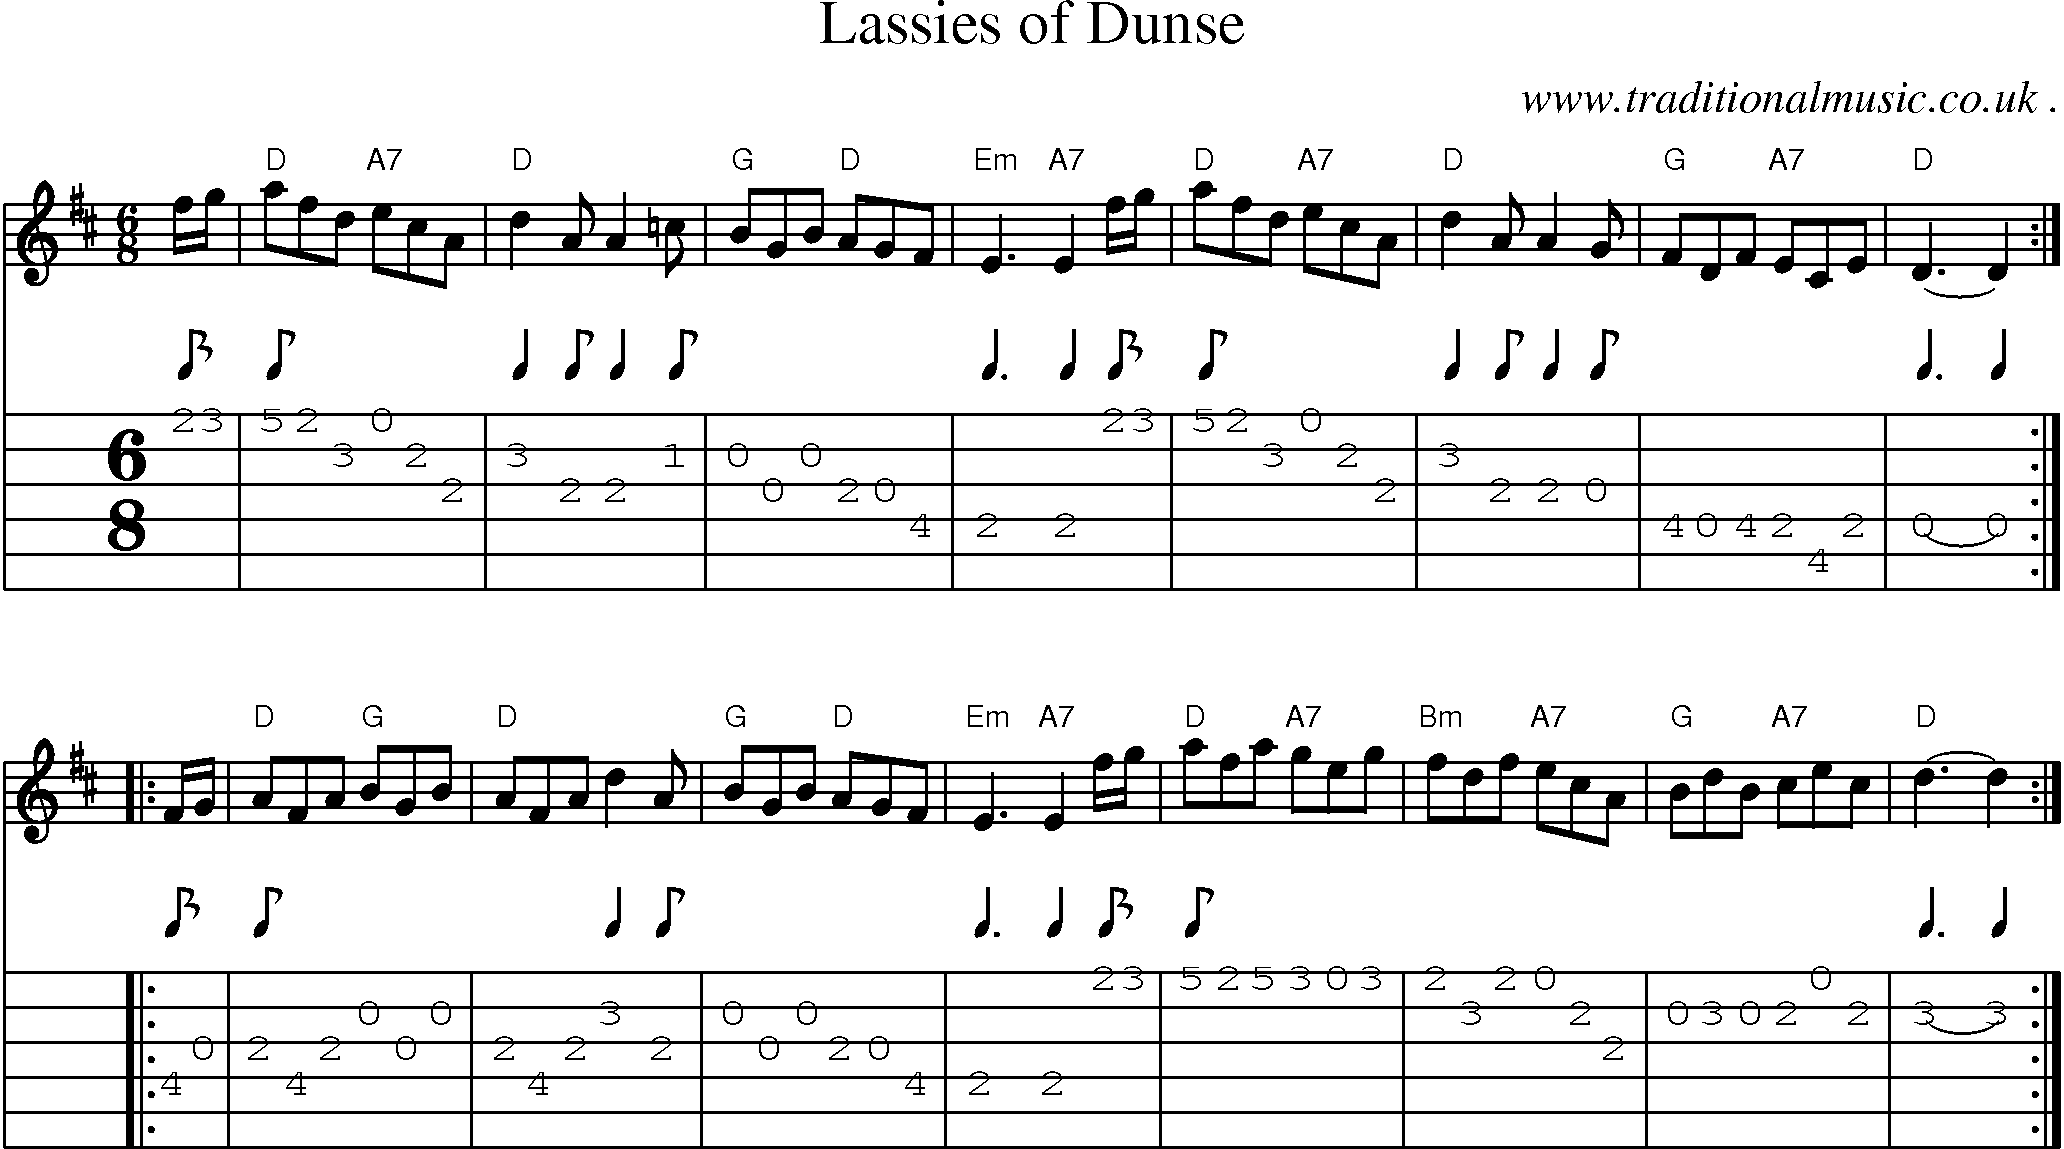 Sheet-music  score, Chords and Guitar Tabs for Lassies Of Dunse